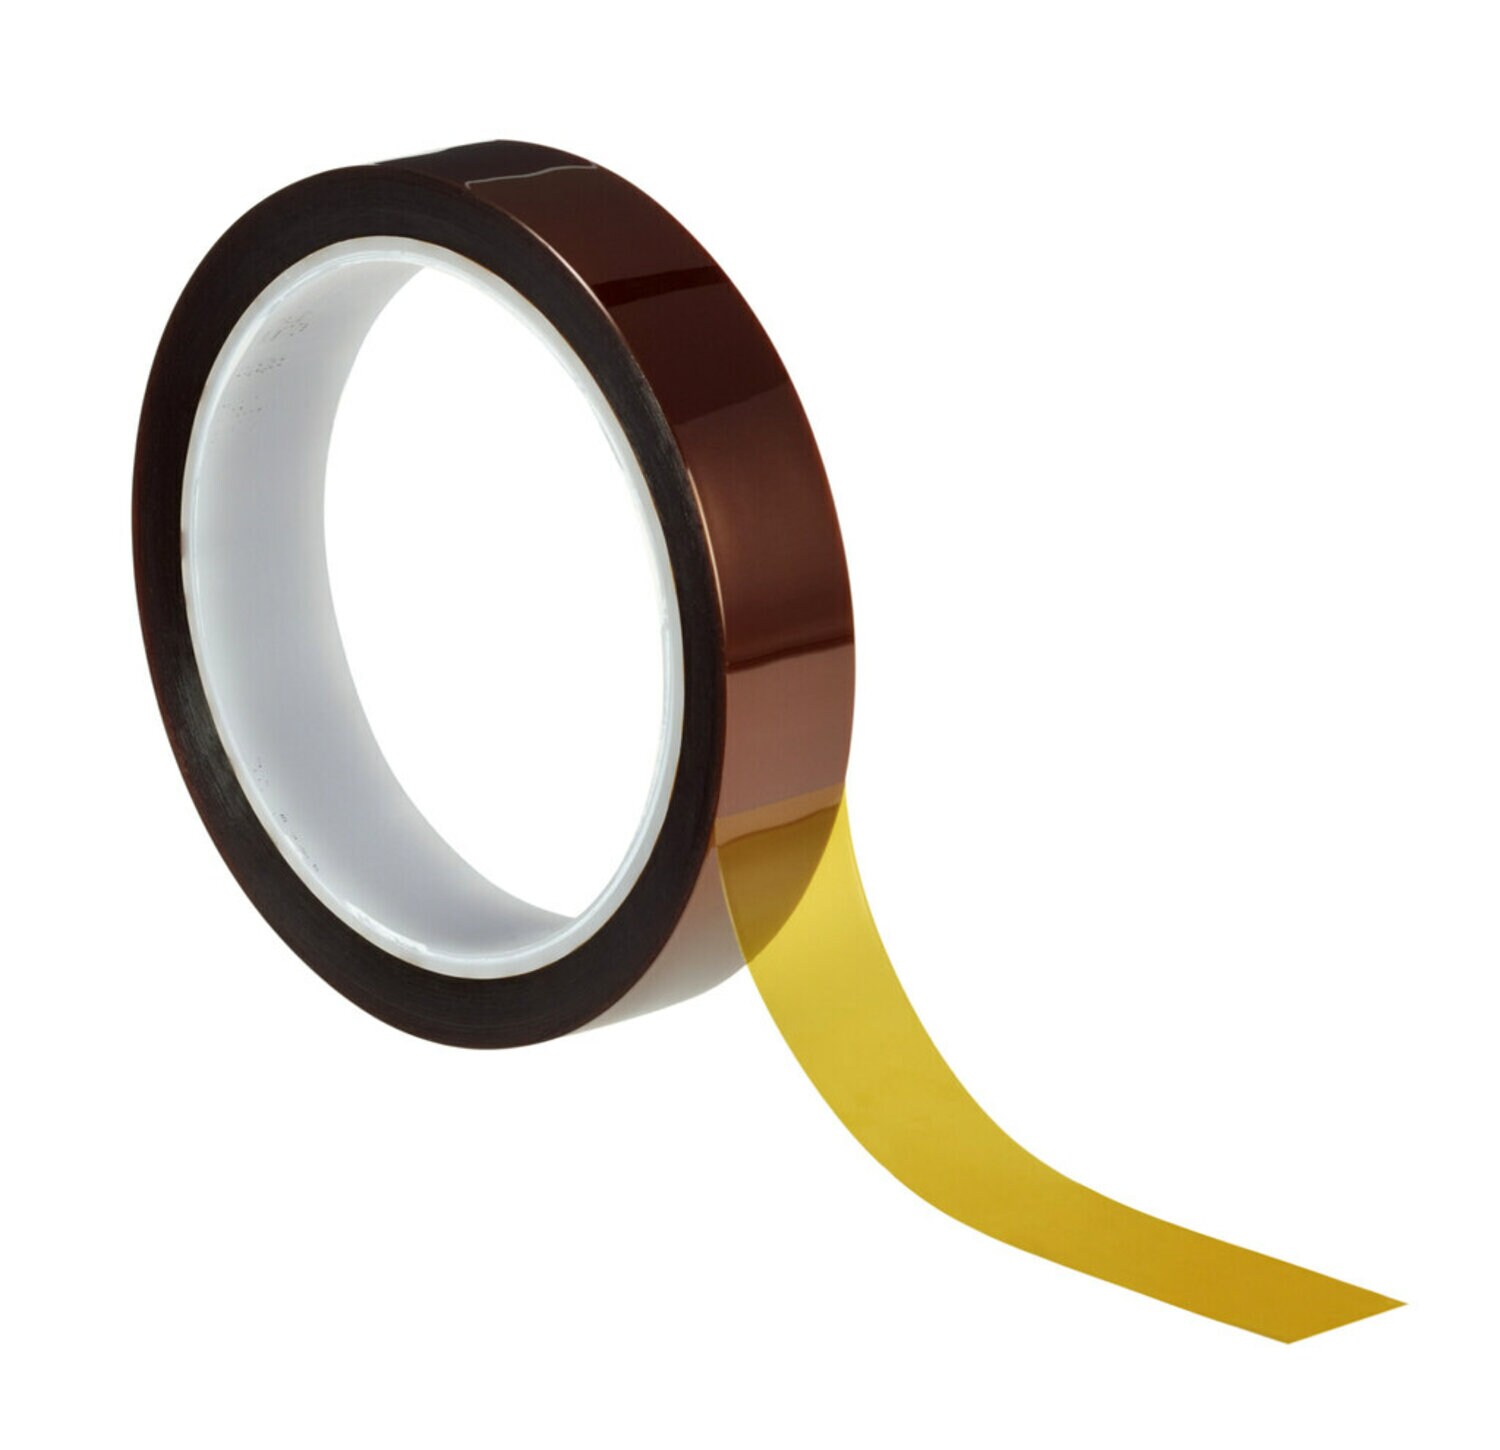 7000029143 - 3M Polyimide Film Tape 5413, Amber ,2.7 mil, 3/4 in x 36 Yd, 12
Rolls/Case